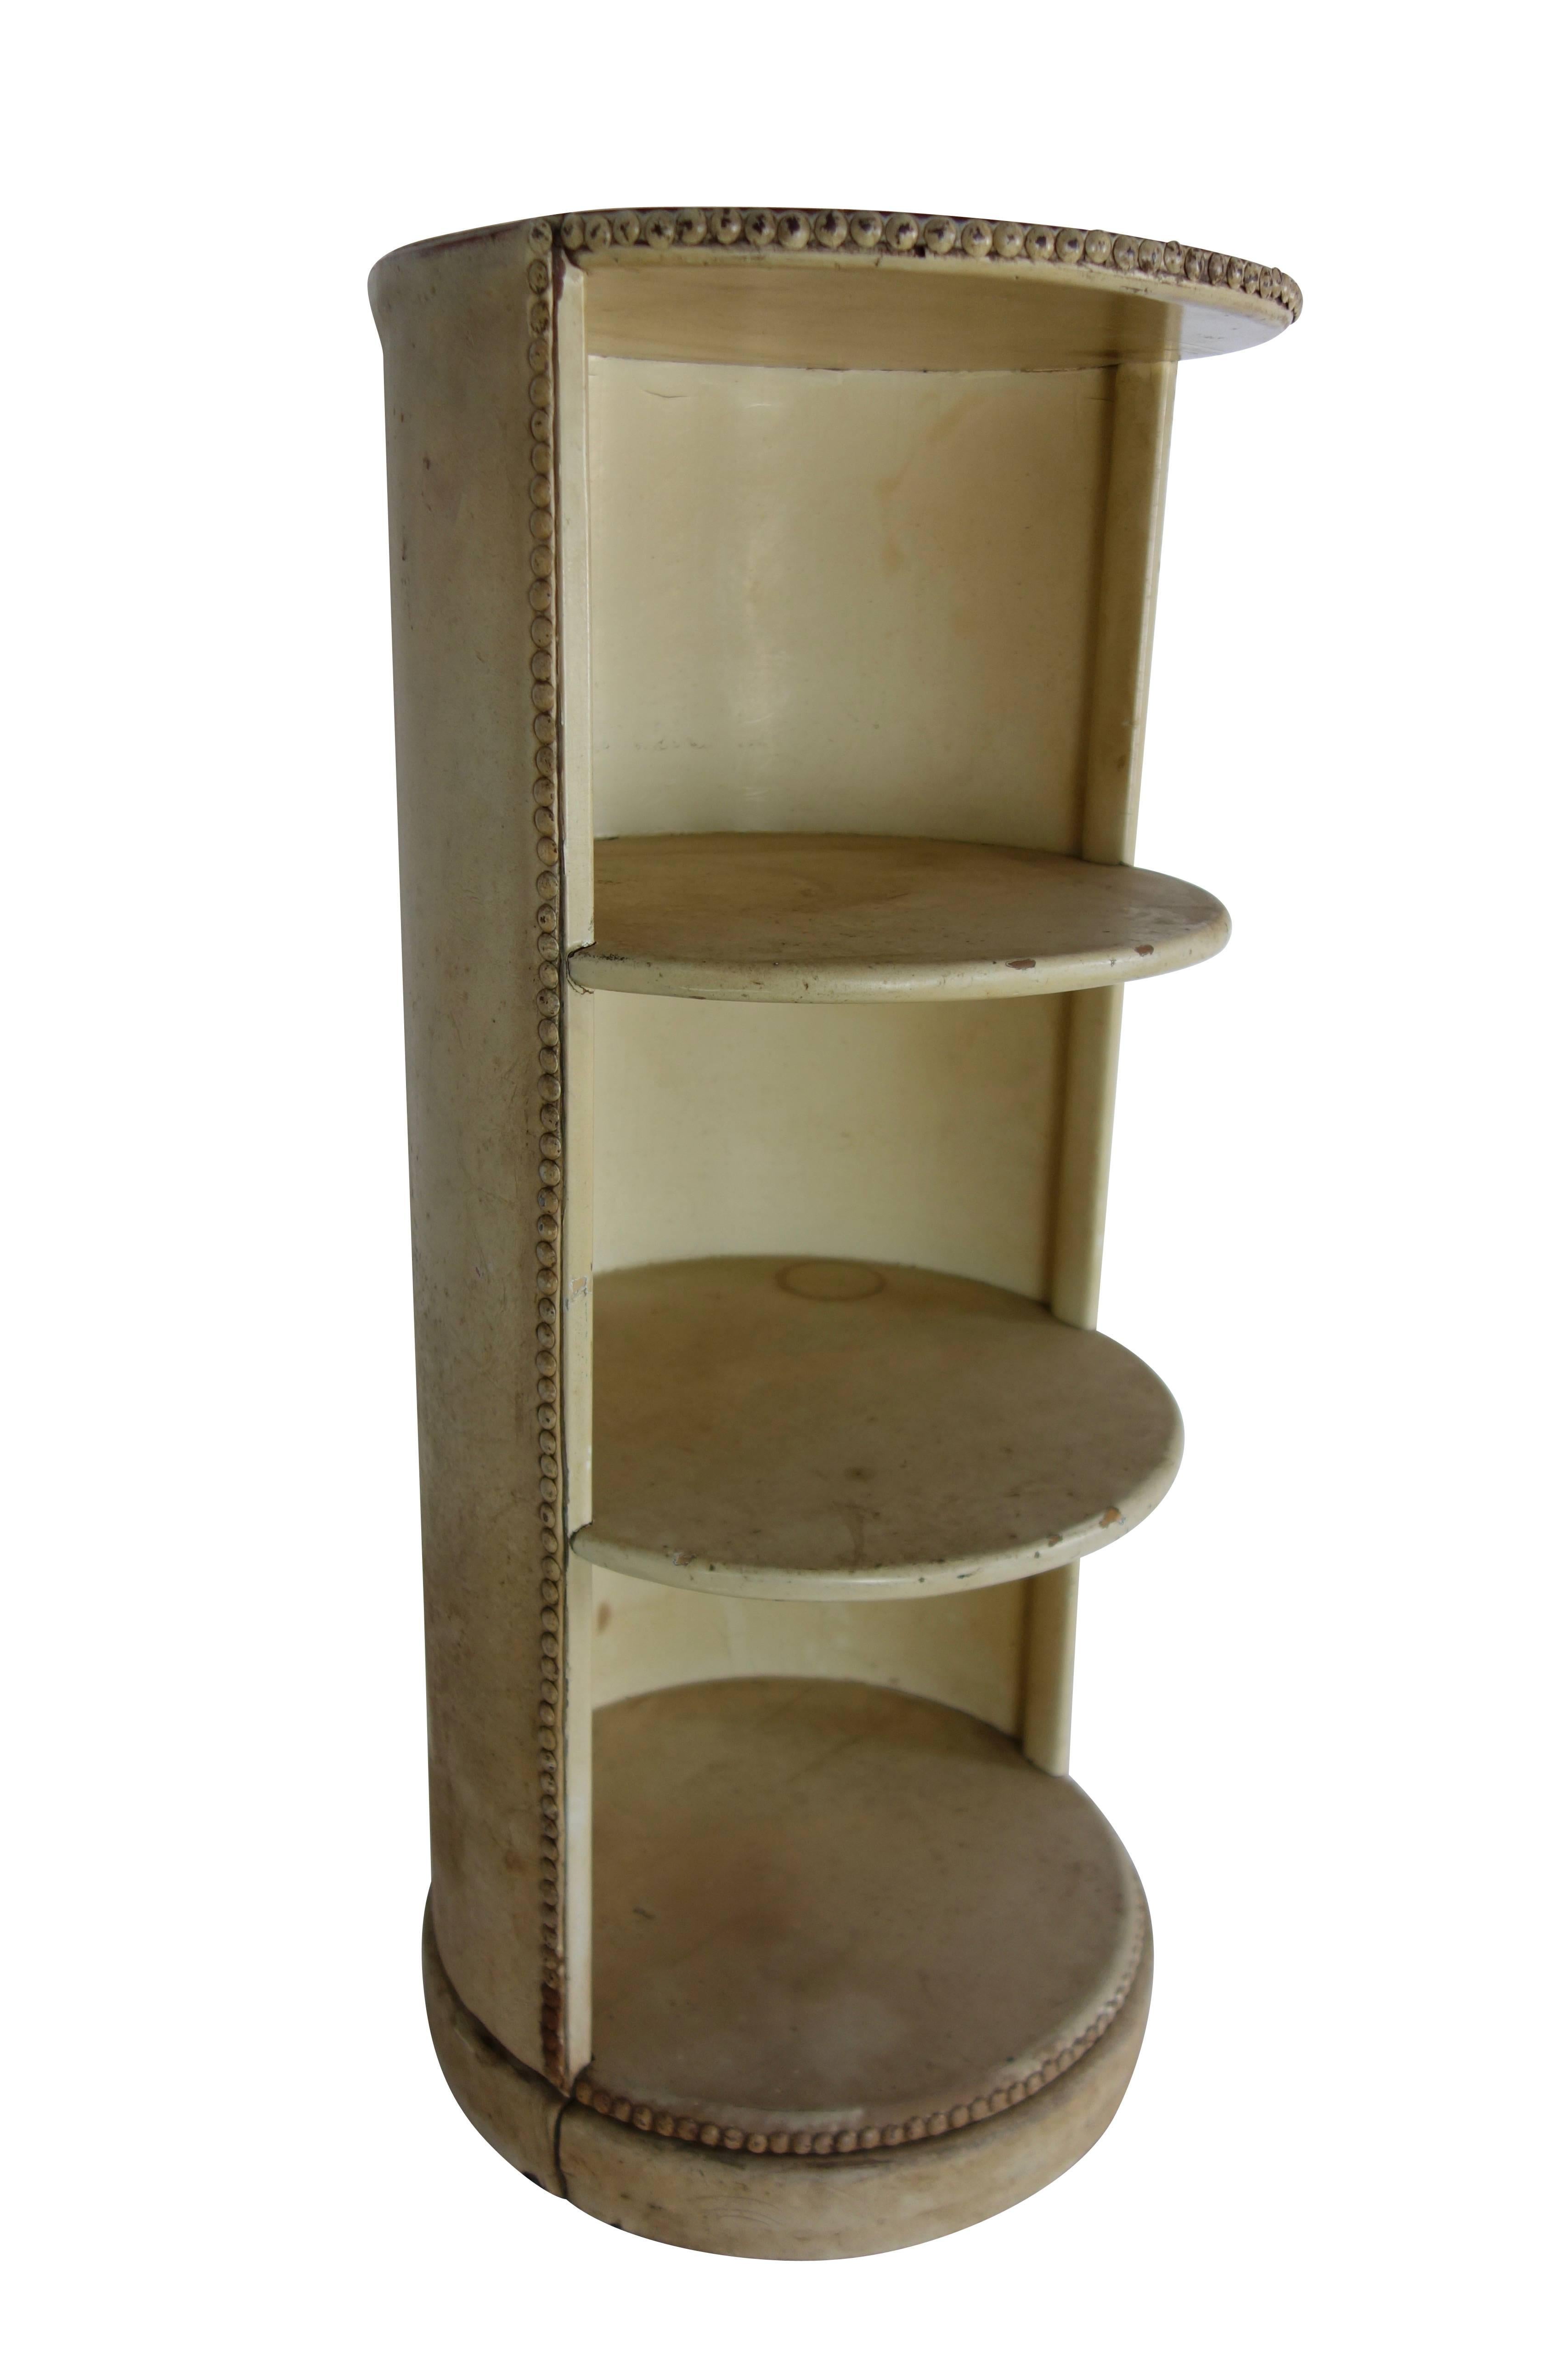 20th Century Leather Riveted Three-Tiered Shelf